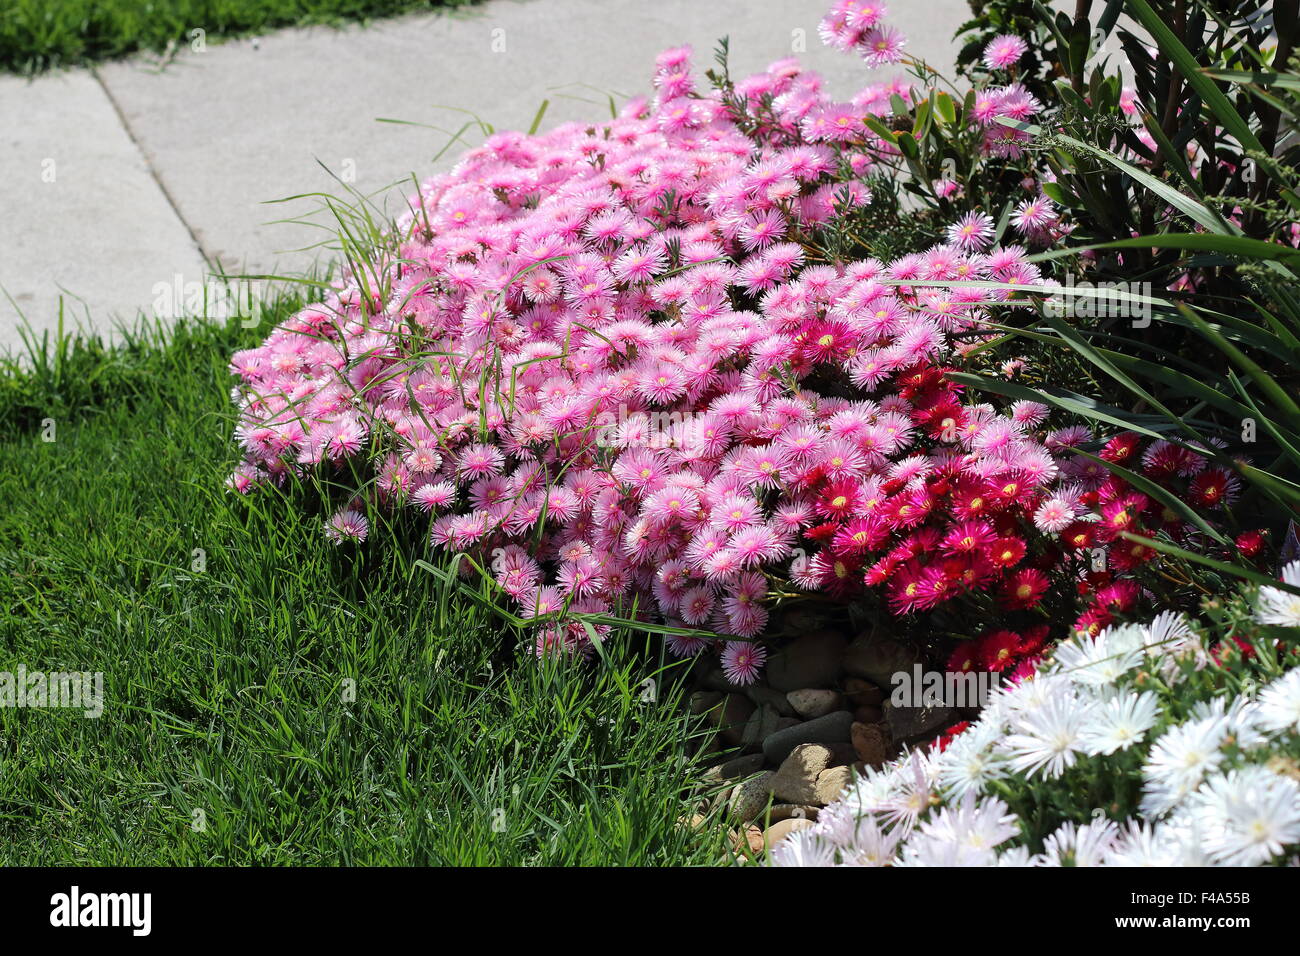 Red  and Pink Pigface or Livingstone Daisies in full bloom Stock Photo